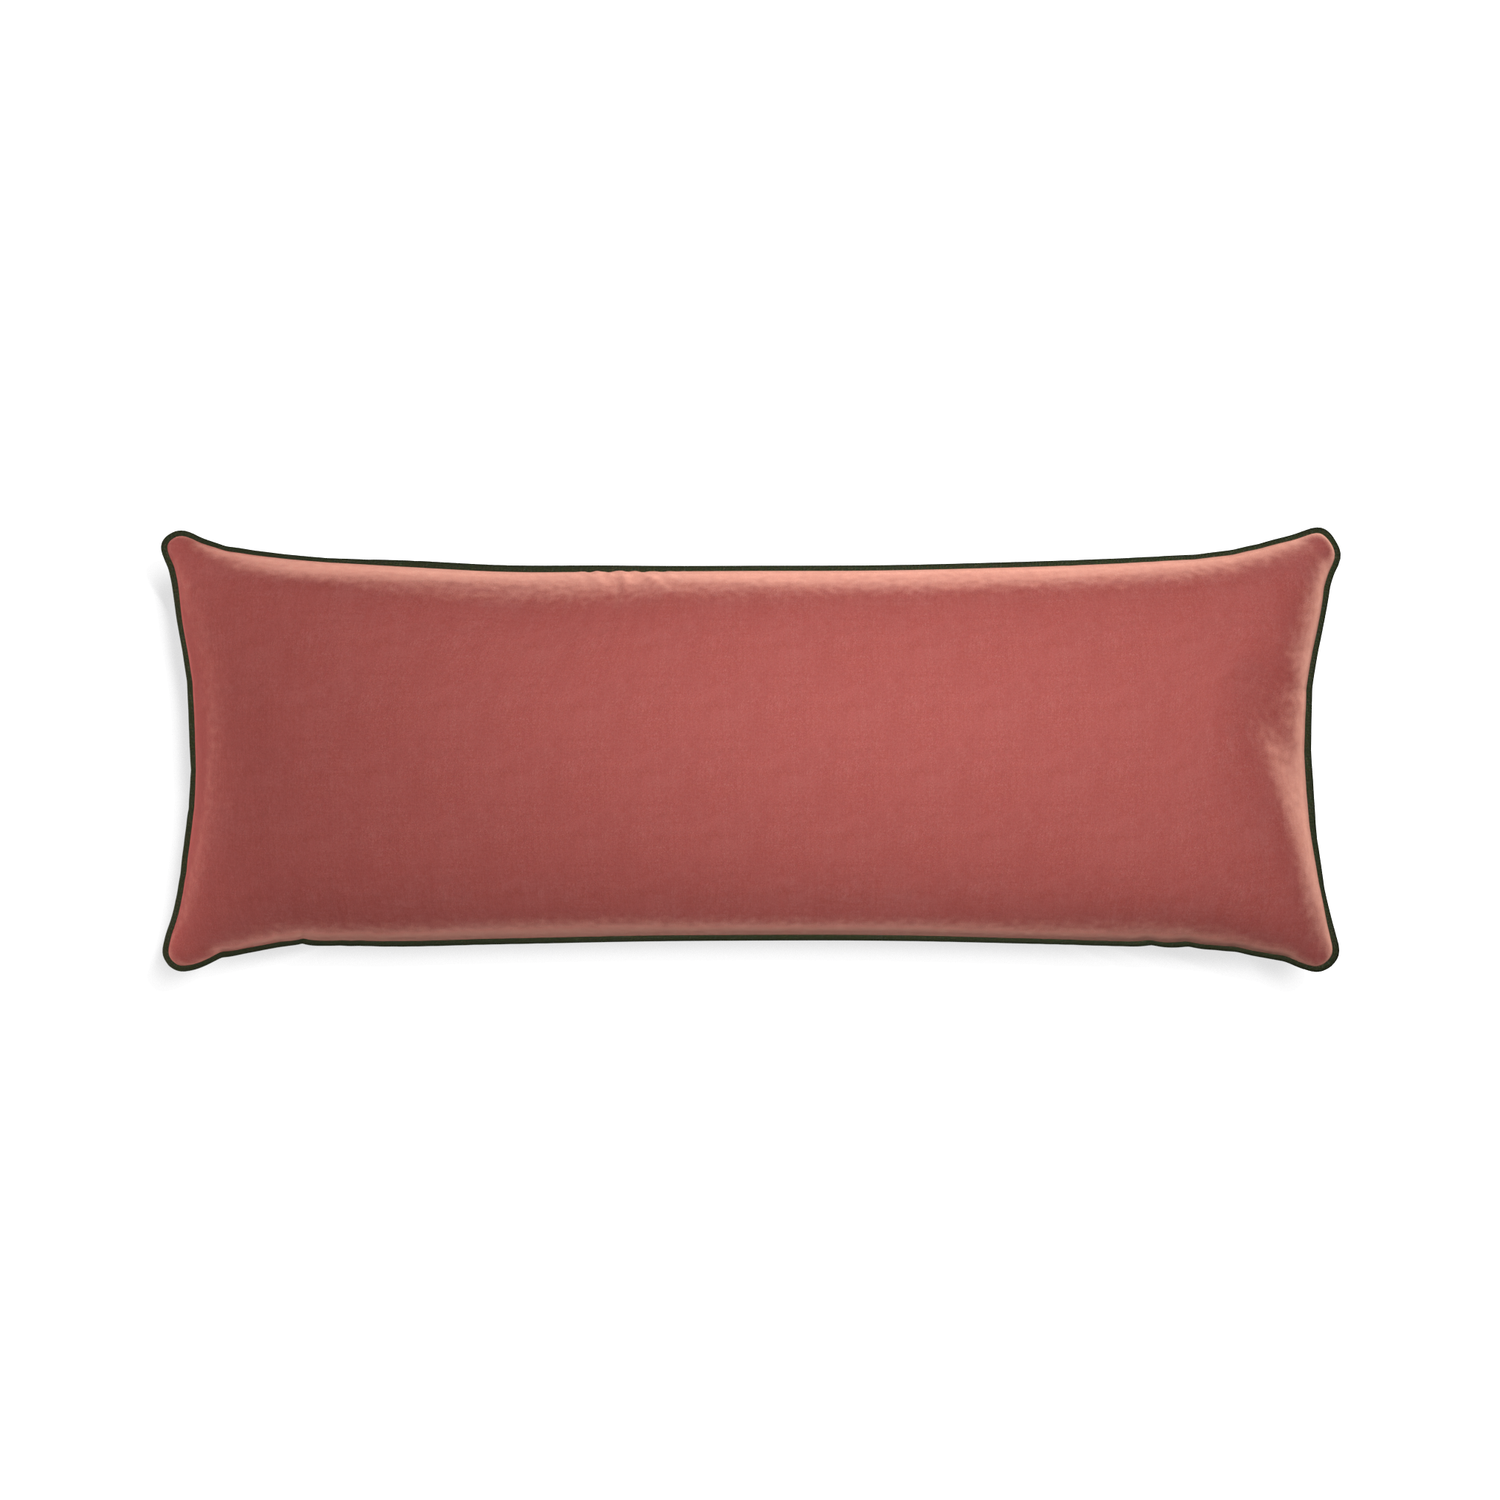 Xl-lumbar cosmo velvet custom pillow with f piping on white background